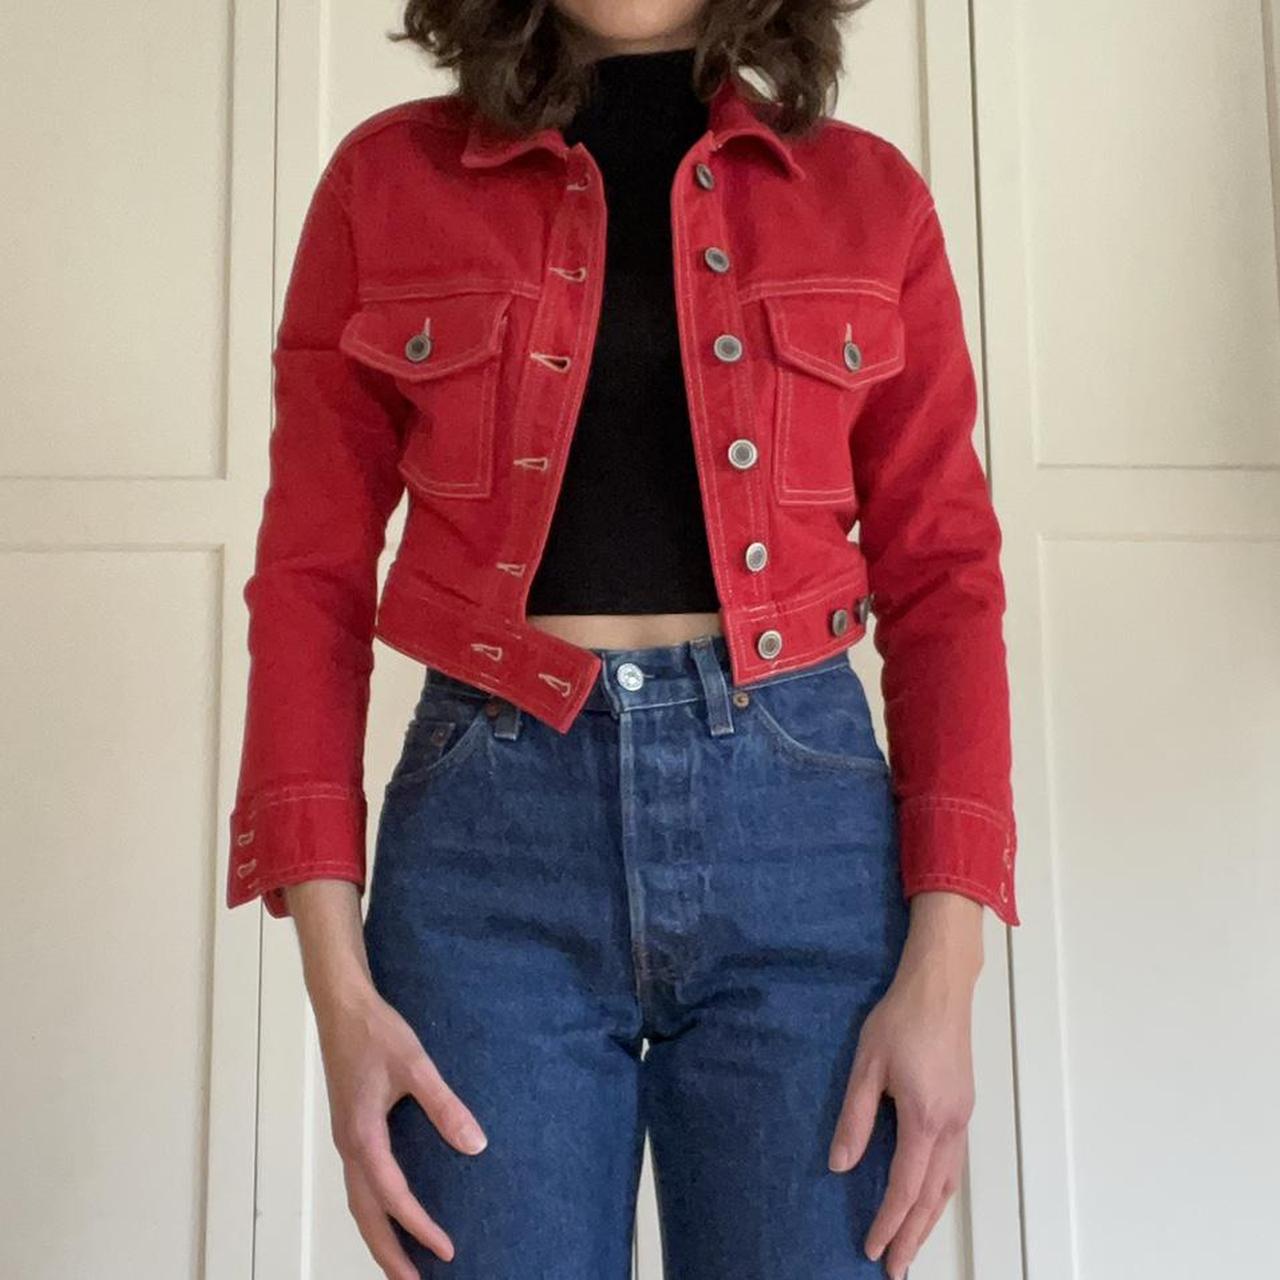 & Other StoriesCropped Denim Jacket in Red | Red denim jacket, Denim jacket  women, Jacket outfits